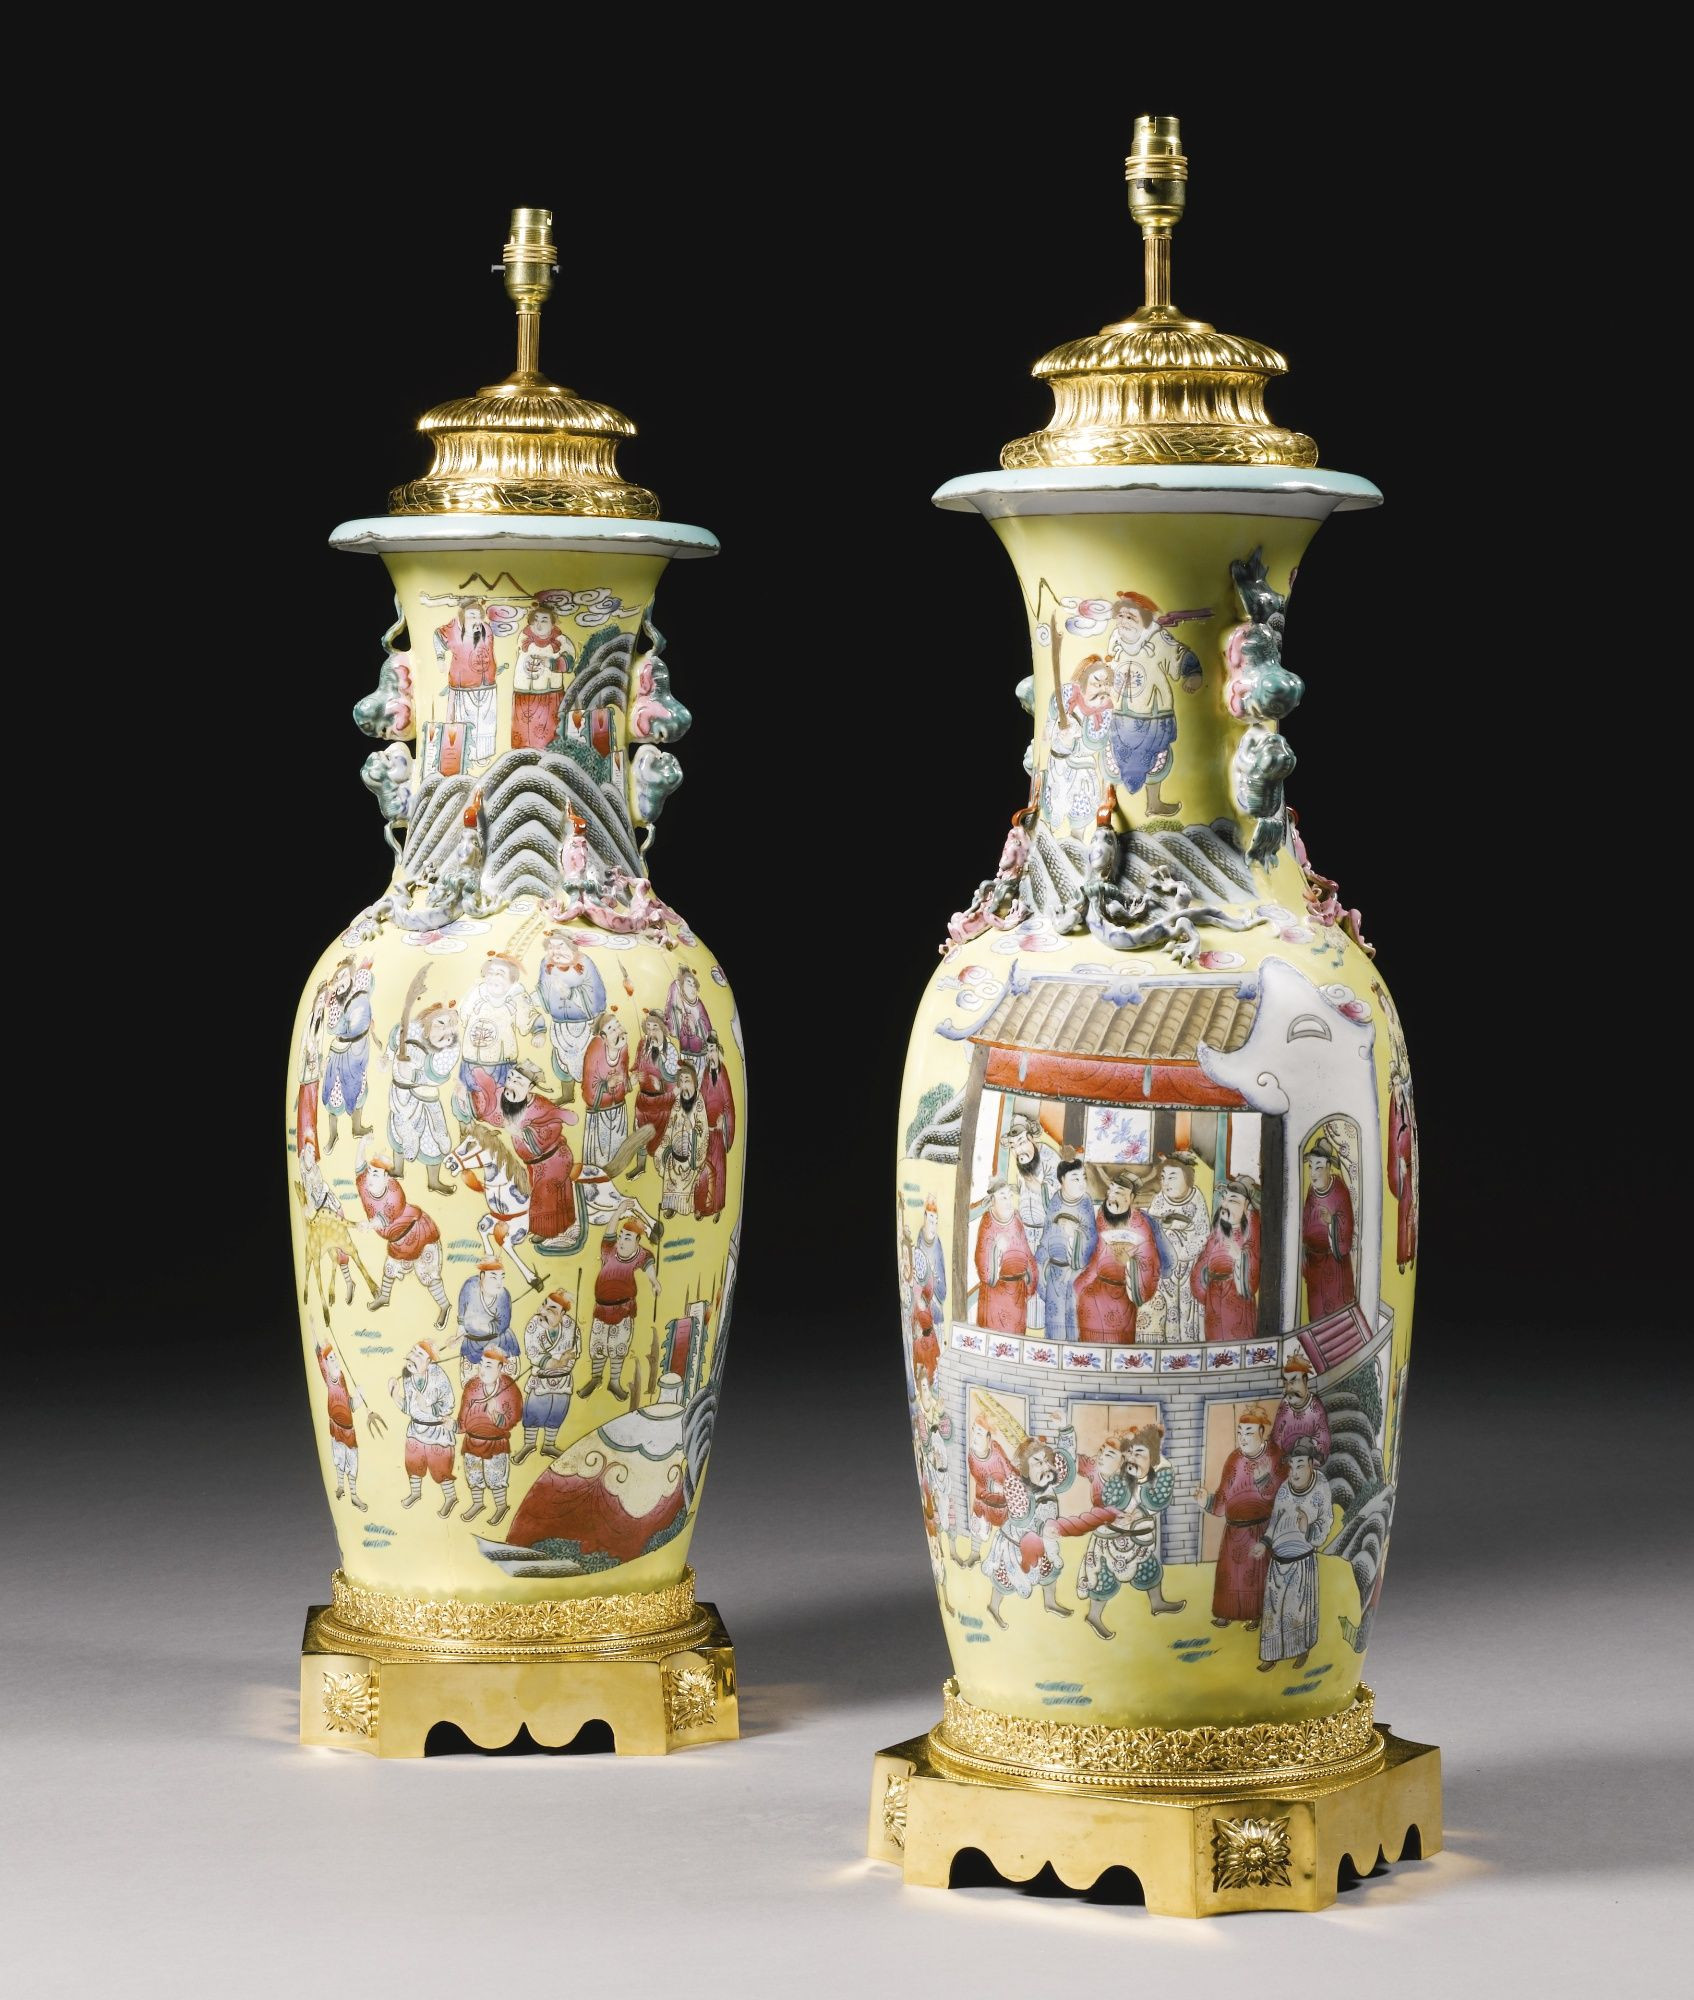 23 Fabulous Chinese Porcelain Vase 2022 free download chinese porcelain vase of a pair of chinese porcelain vases sothebys chinese art throughout a pair of chinese porcelain vases sothebys